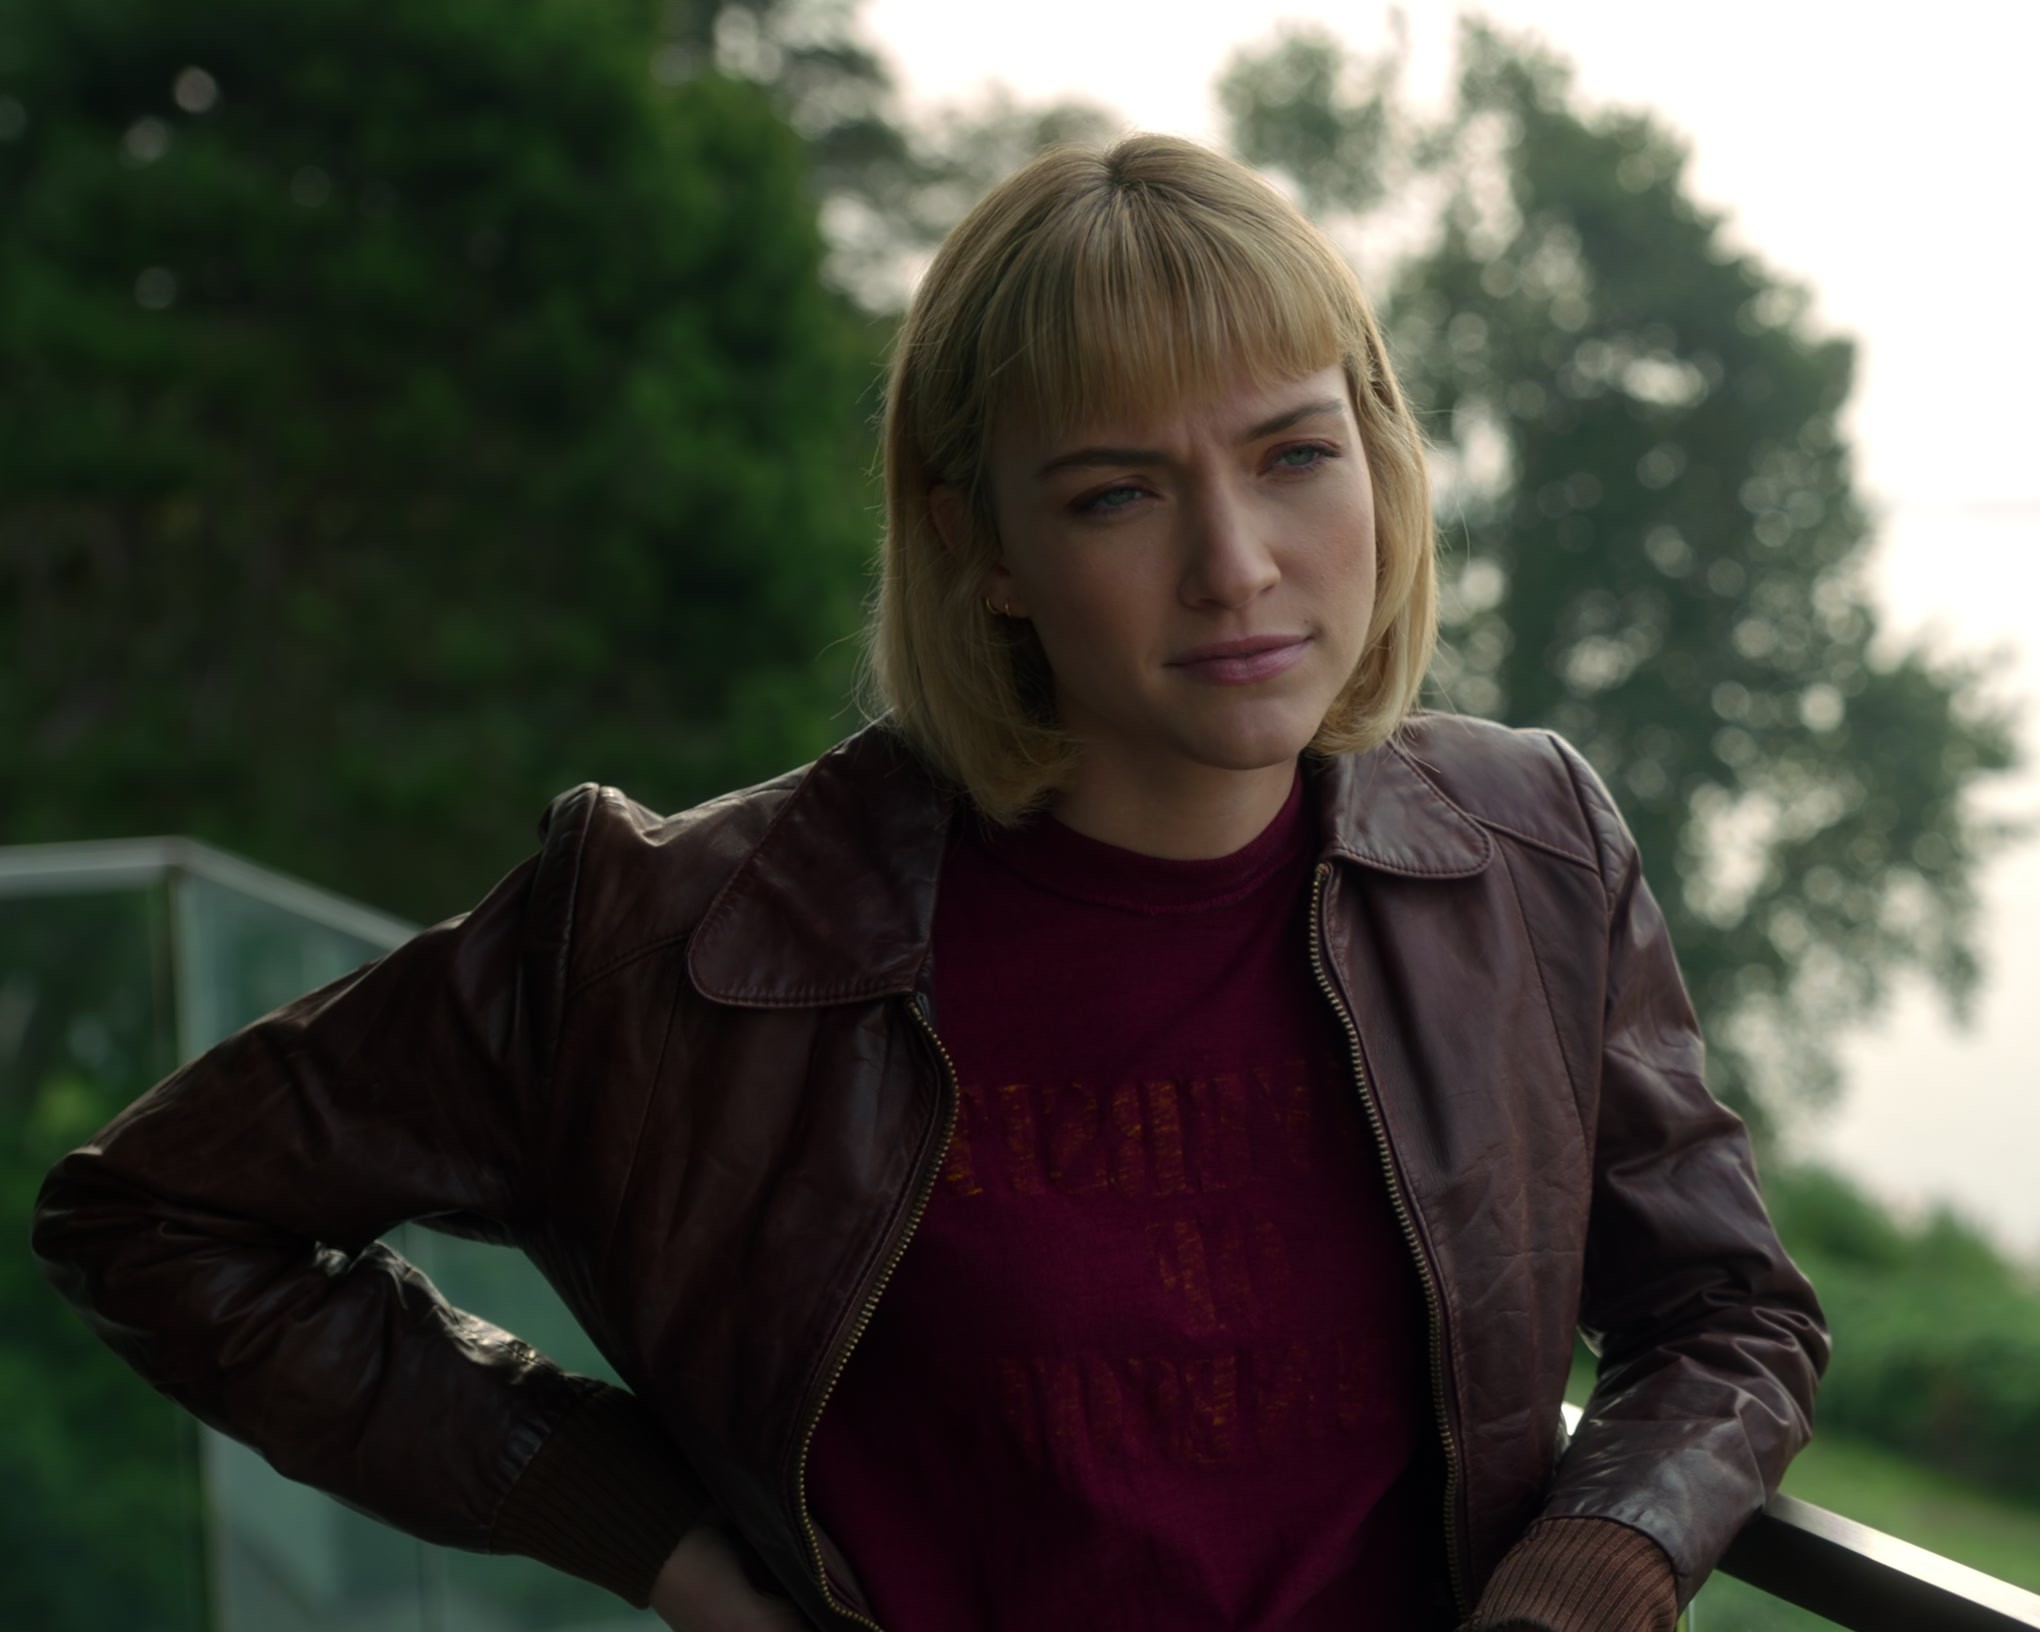 Worn on Death and Other Details TV Show - Brown Leather Jacket of Violett Beane as Imogene Scott